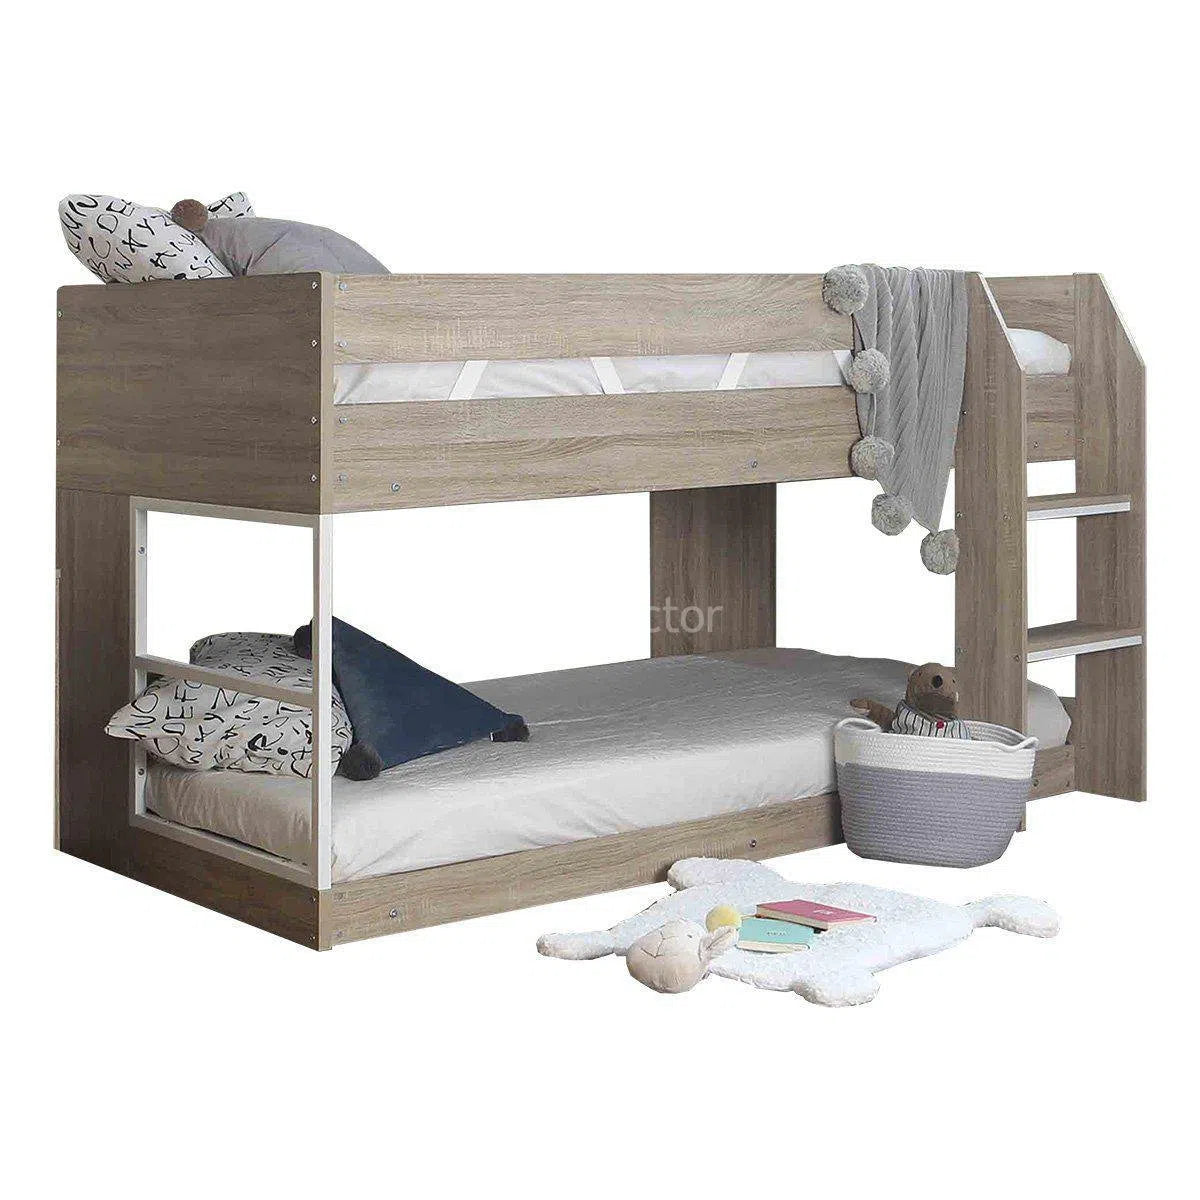 Z1 Low Line Bunk Bed with Front Ladder in Oak and White Finish-Sleep Doctor